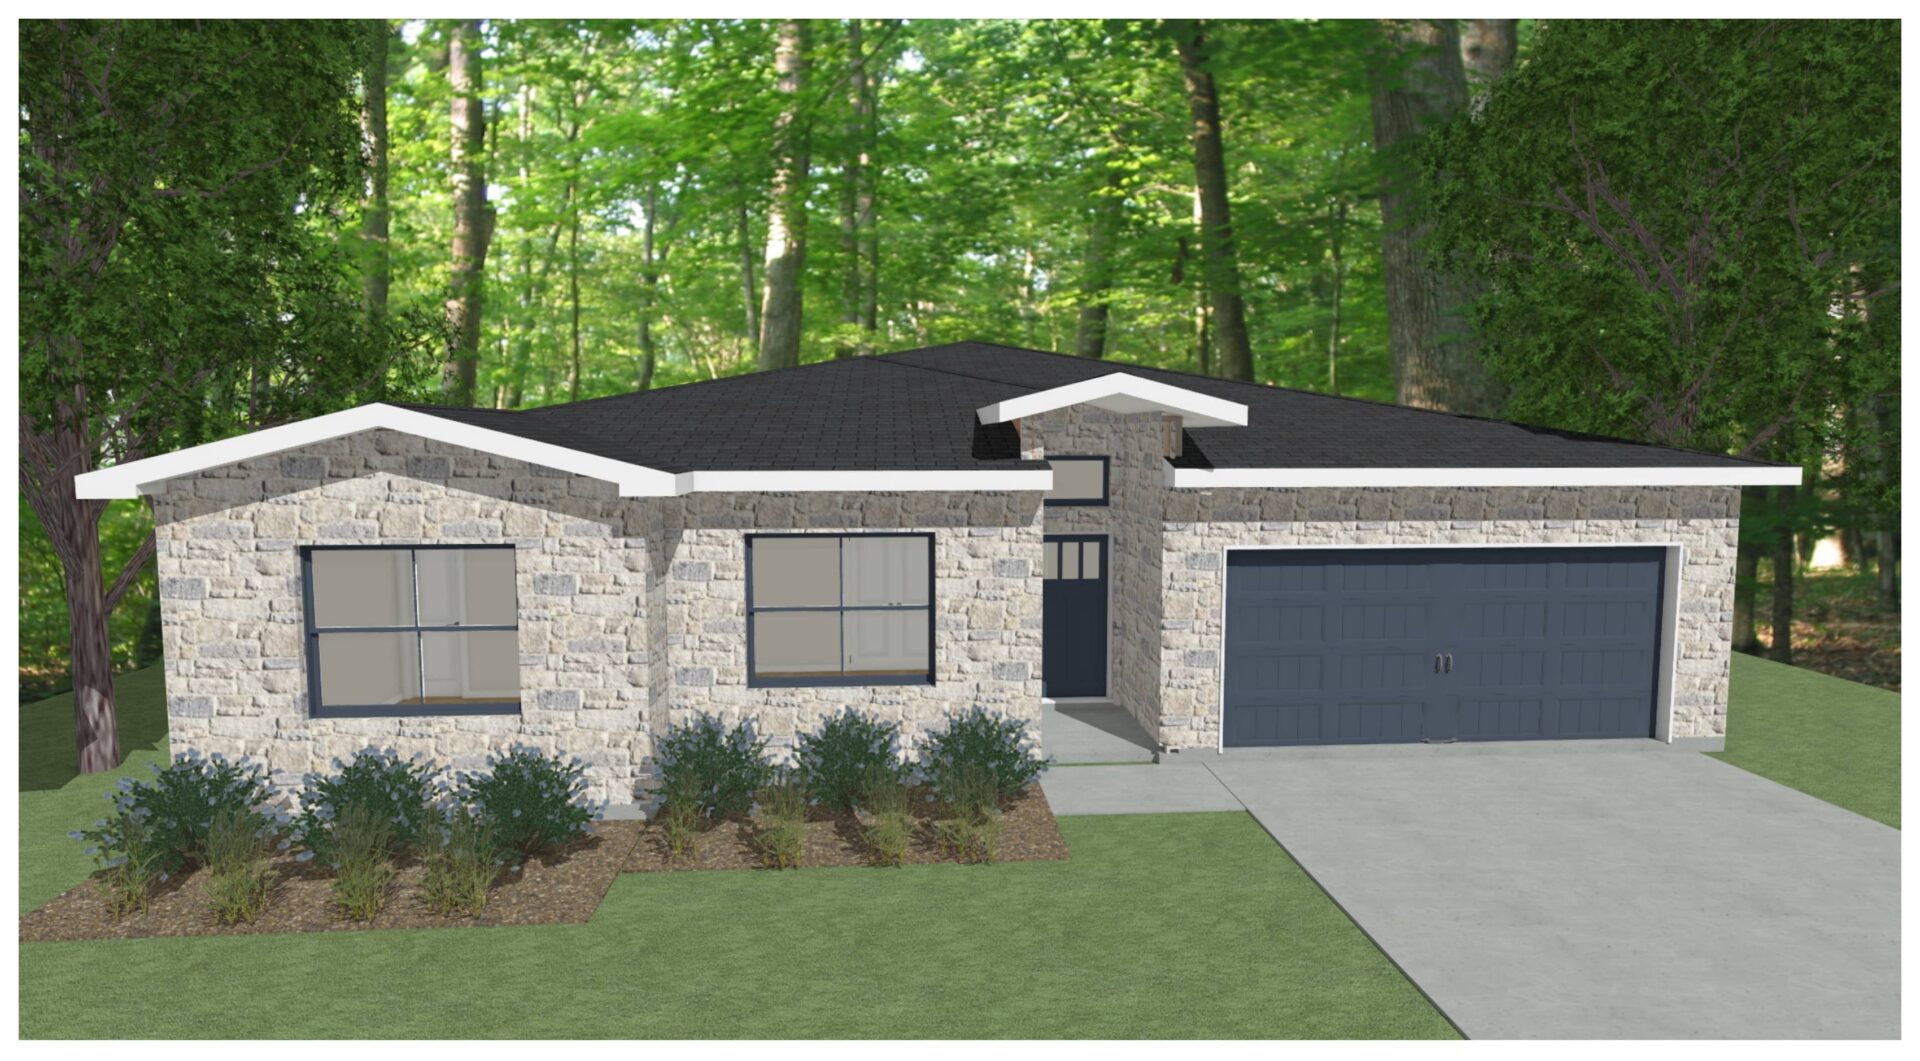 A rendering of a home with a garage in the woods.